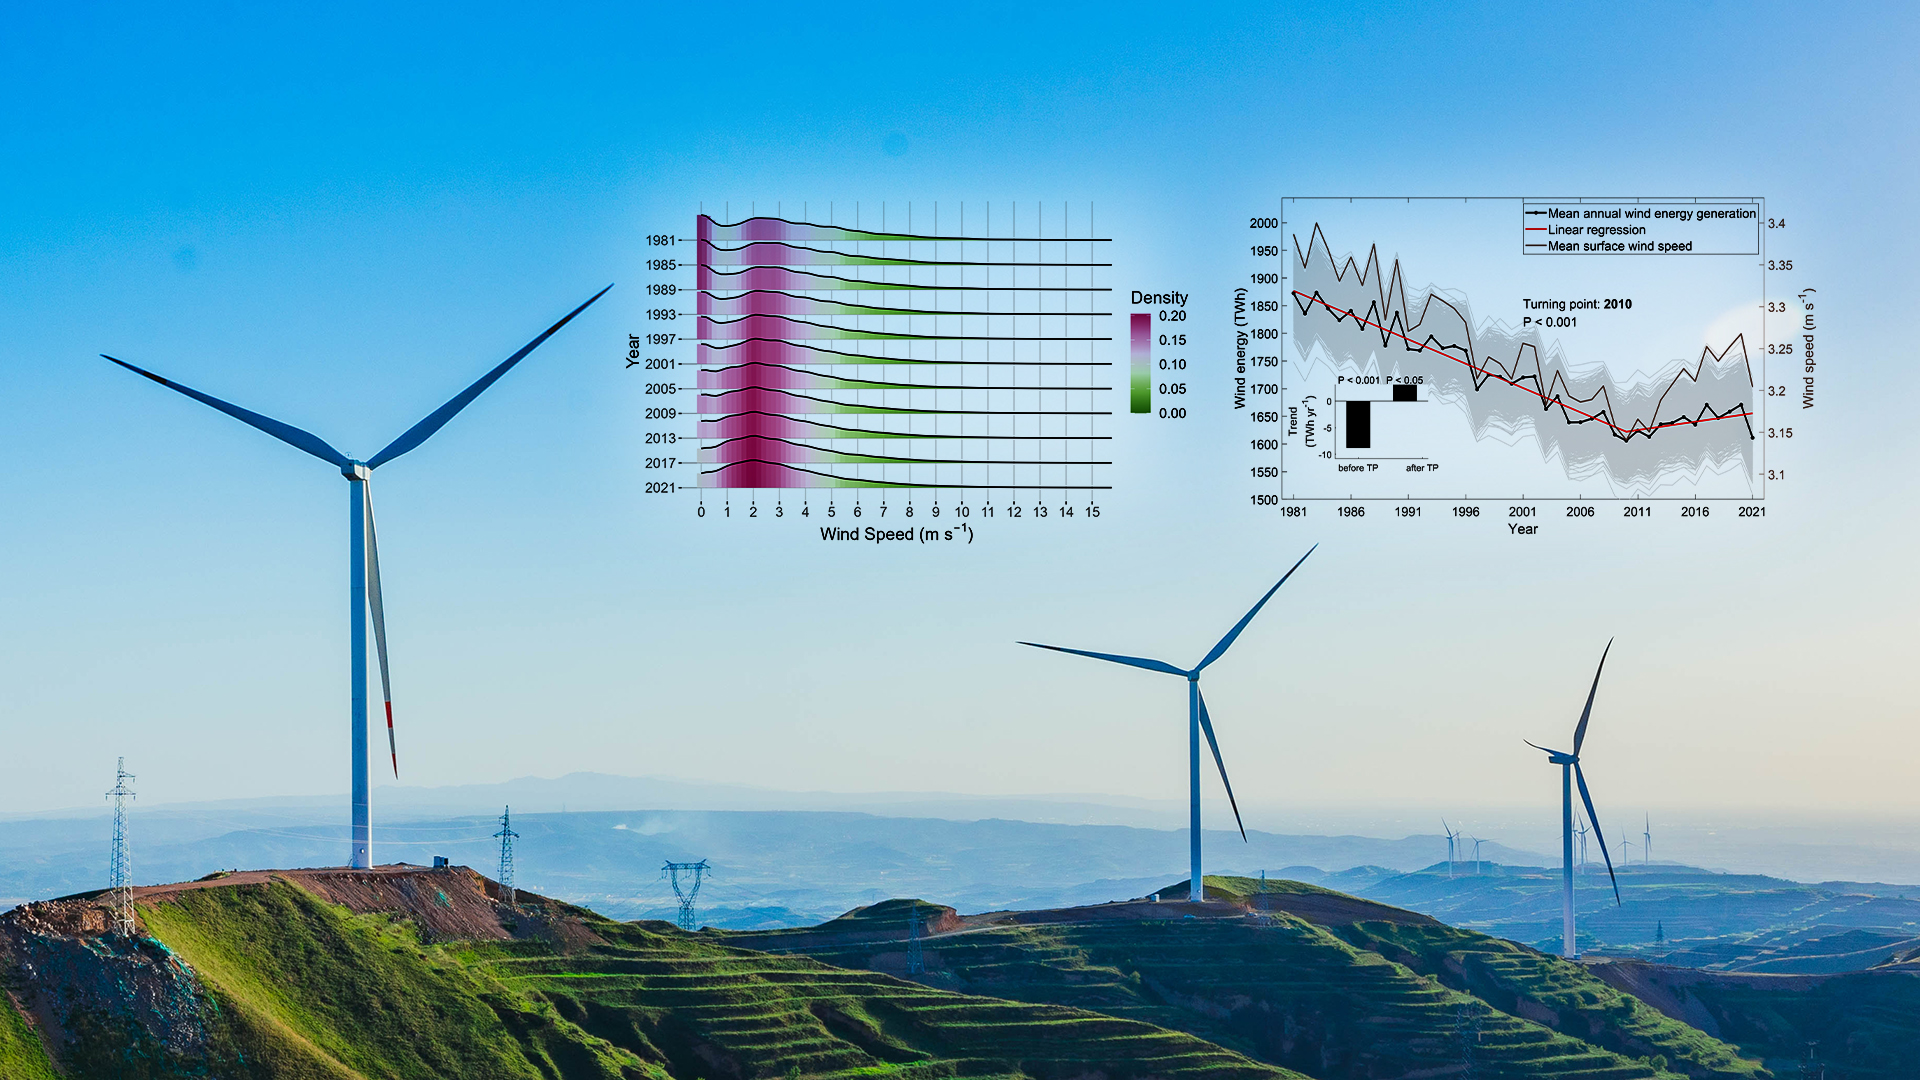 Exploration changes in terrestrial wind speed frequency and impact on wind power potential